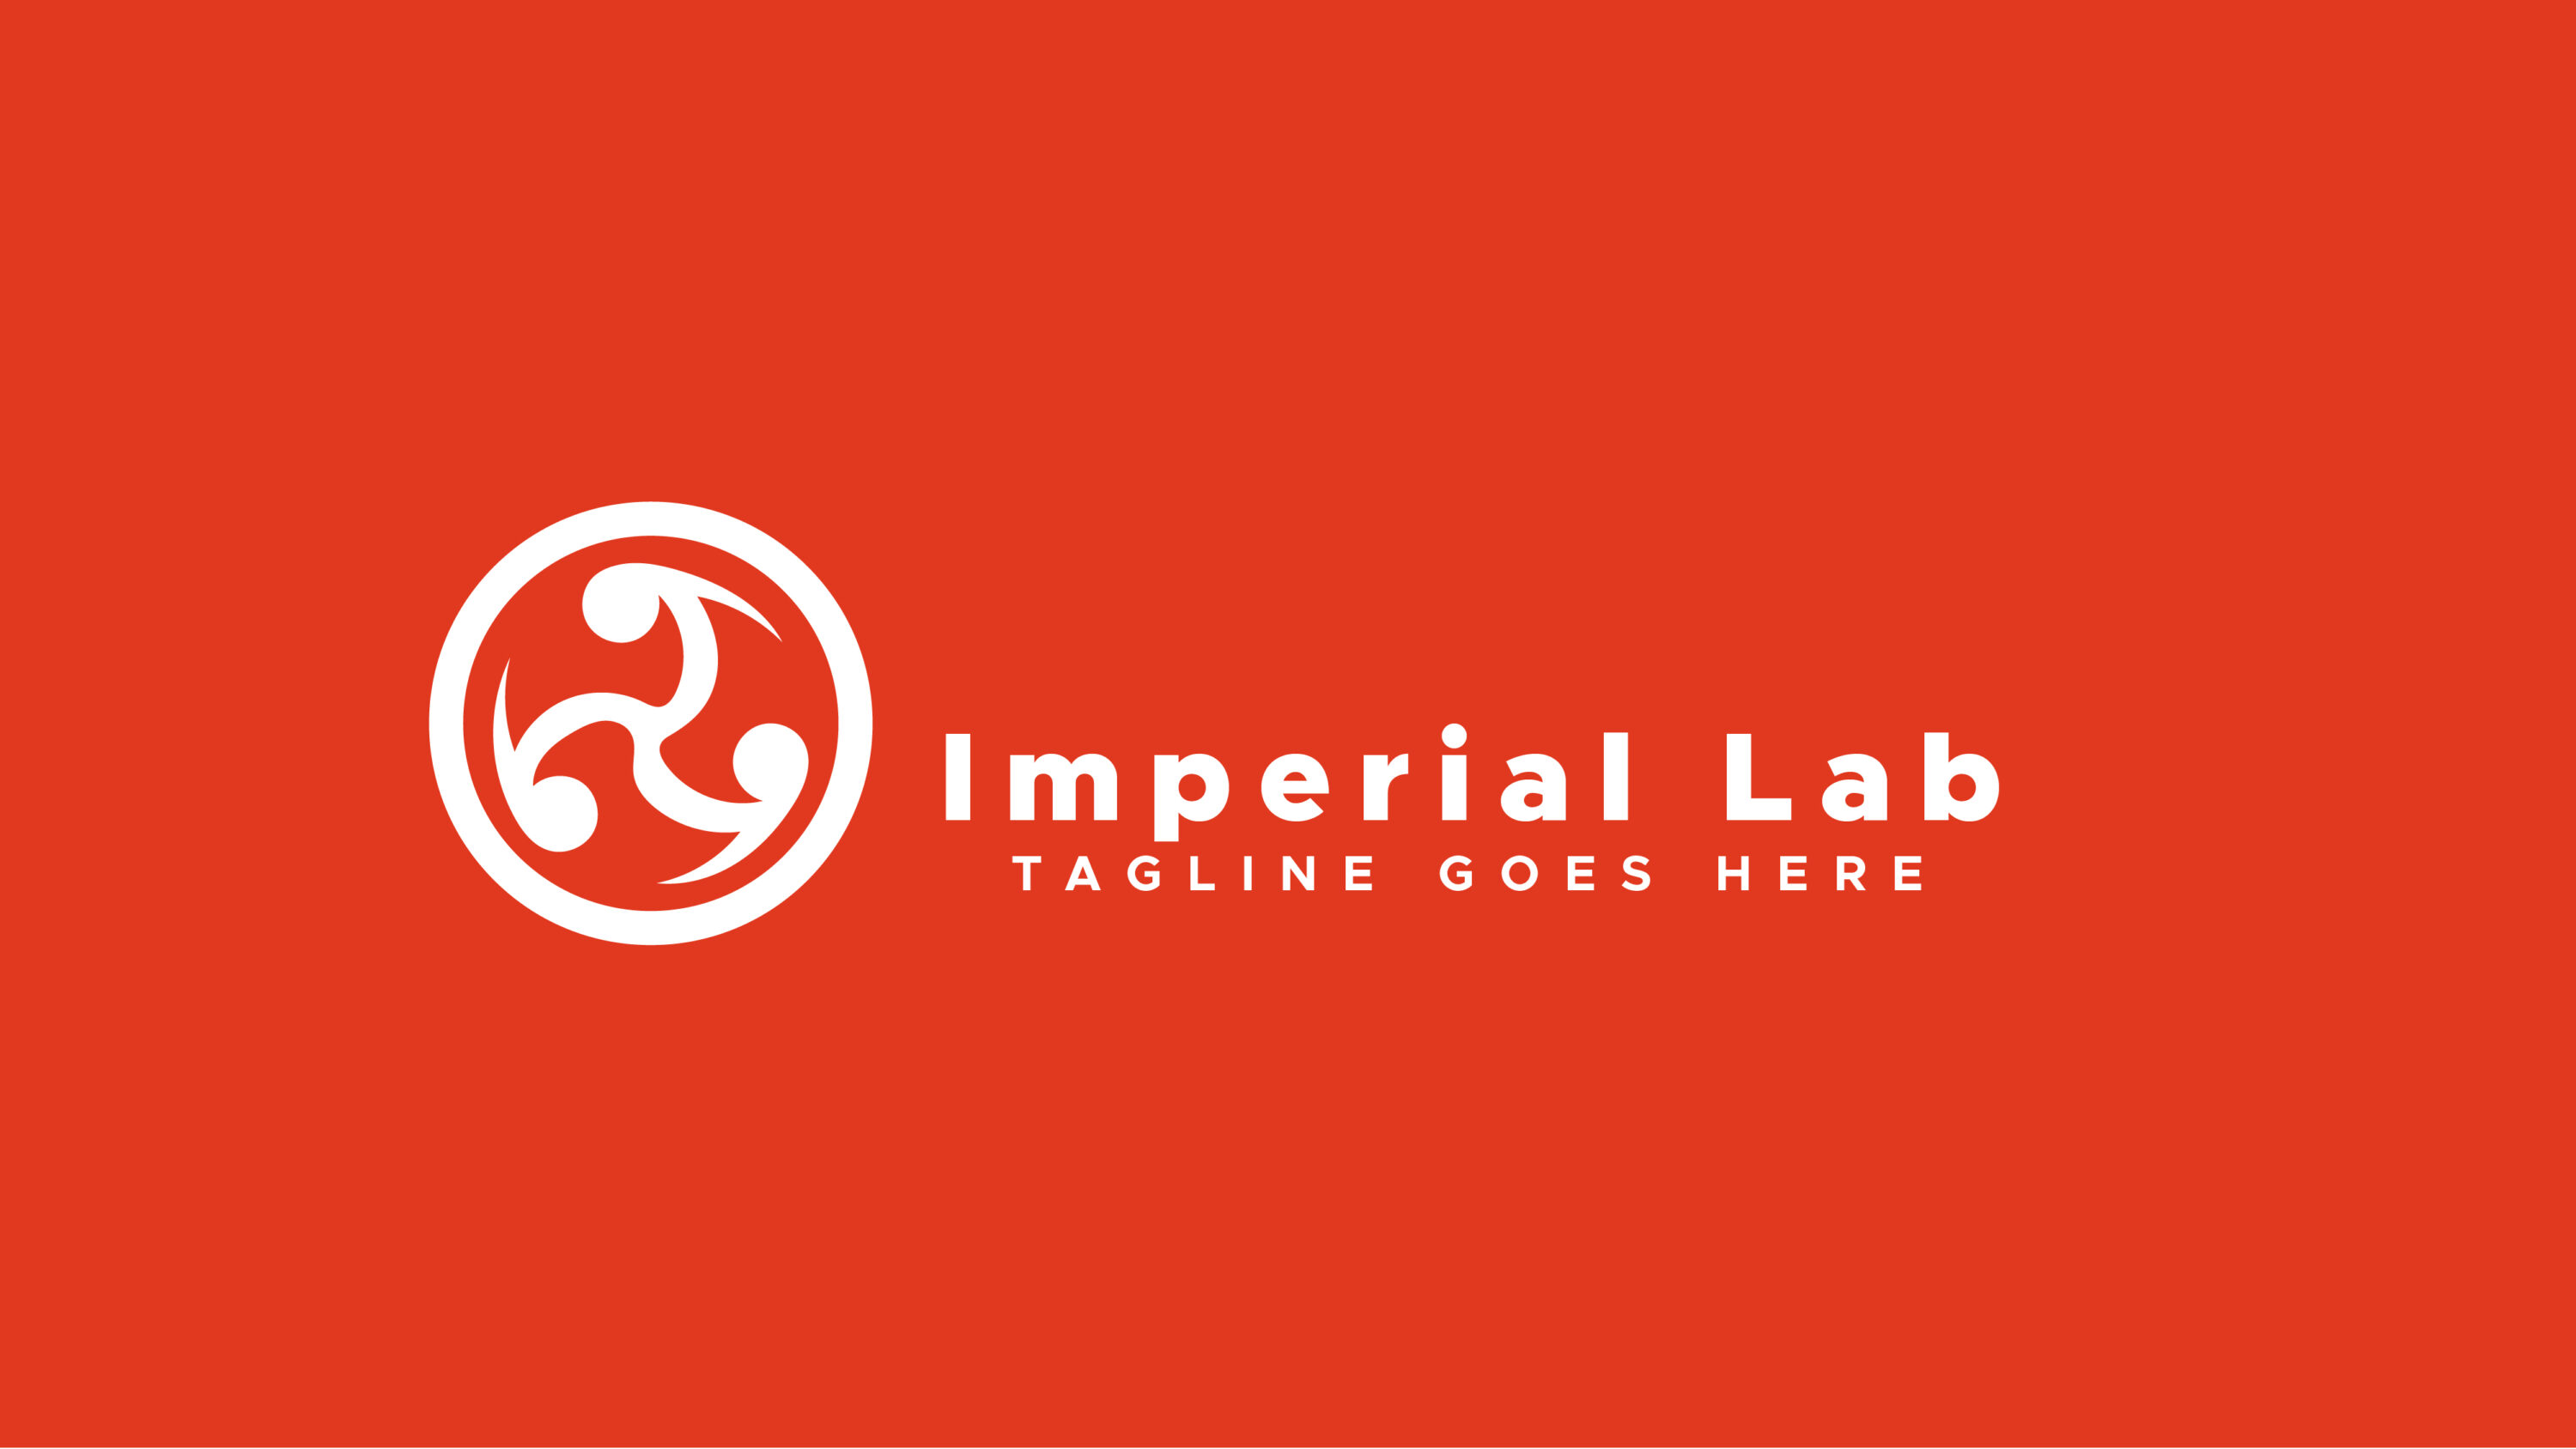 Imperial Lab Professional Logo Design Template Only 12$, white logo on red background.